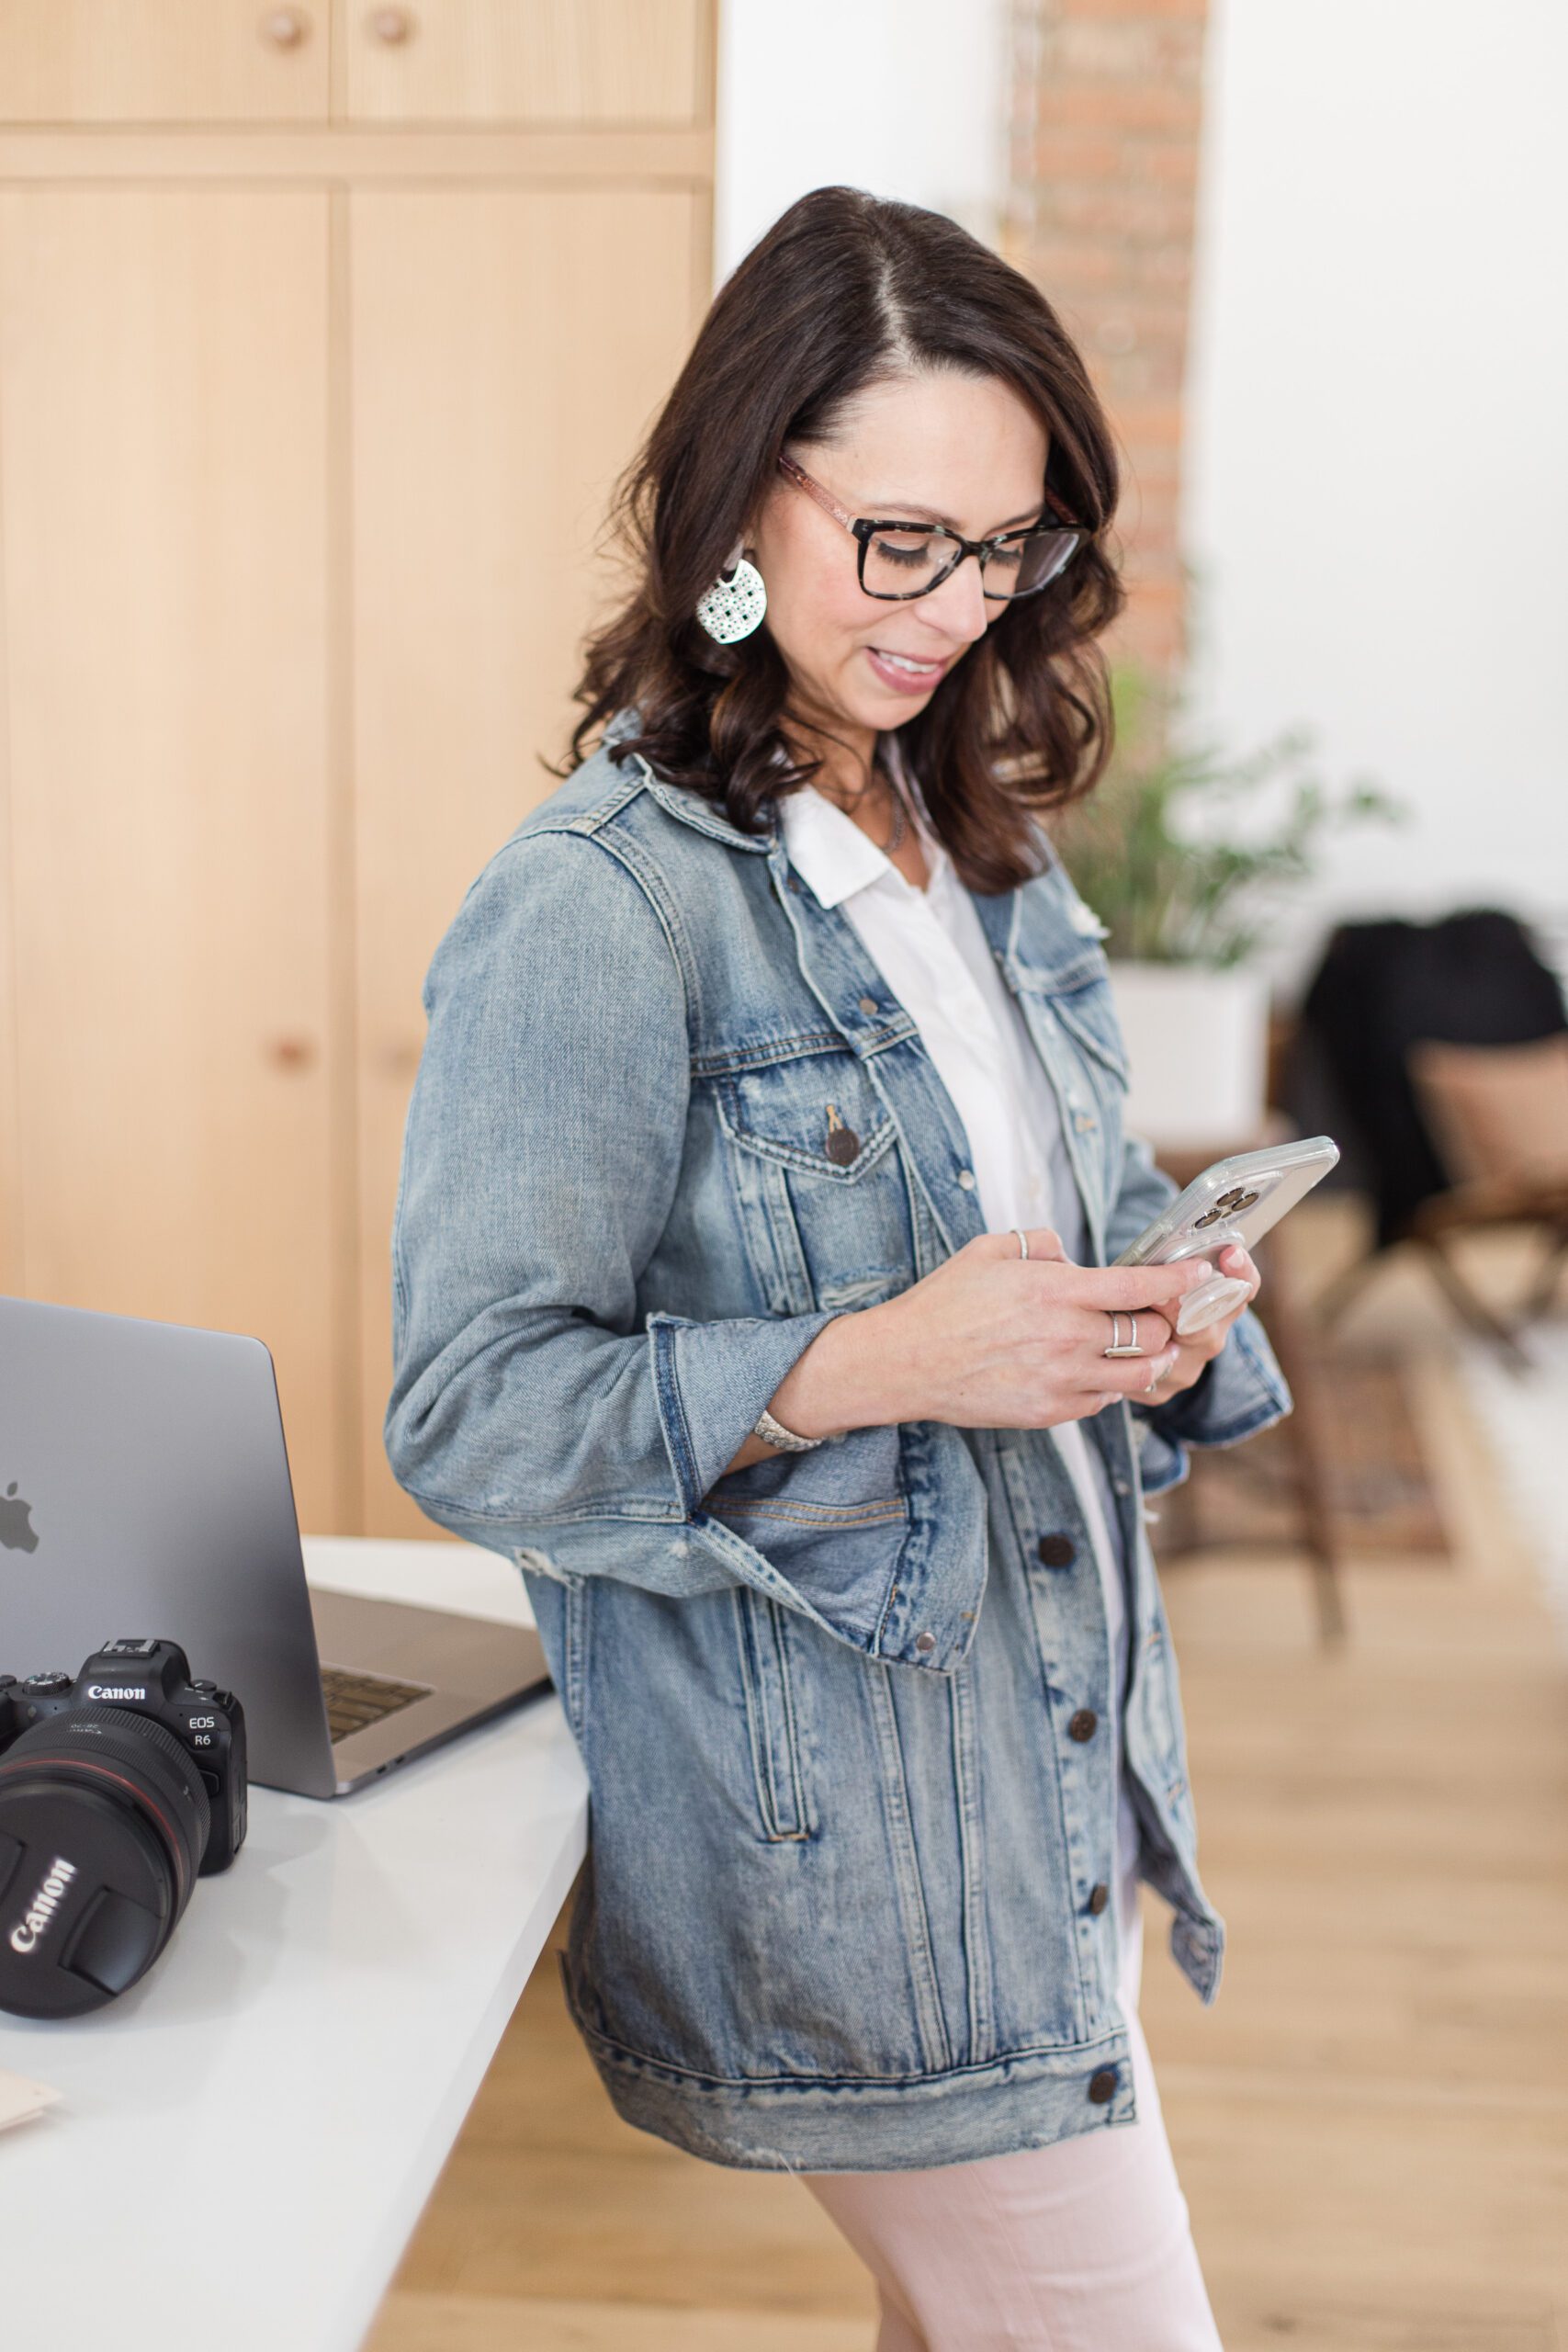 TN branding photographer Amy Allmand Photography shares why you should download your high resolution branding images